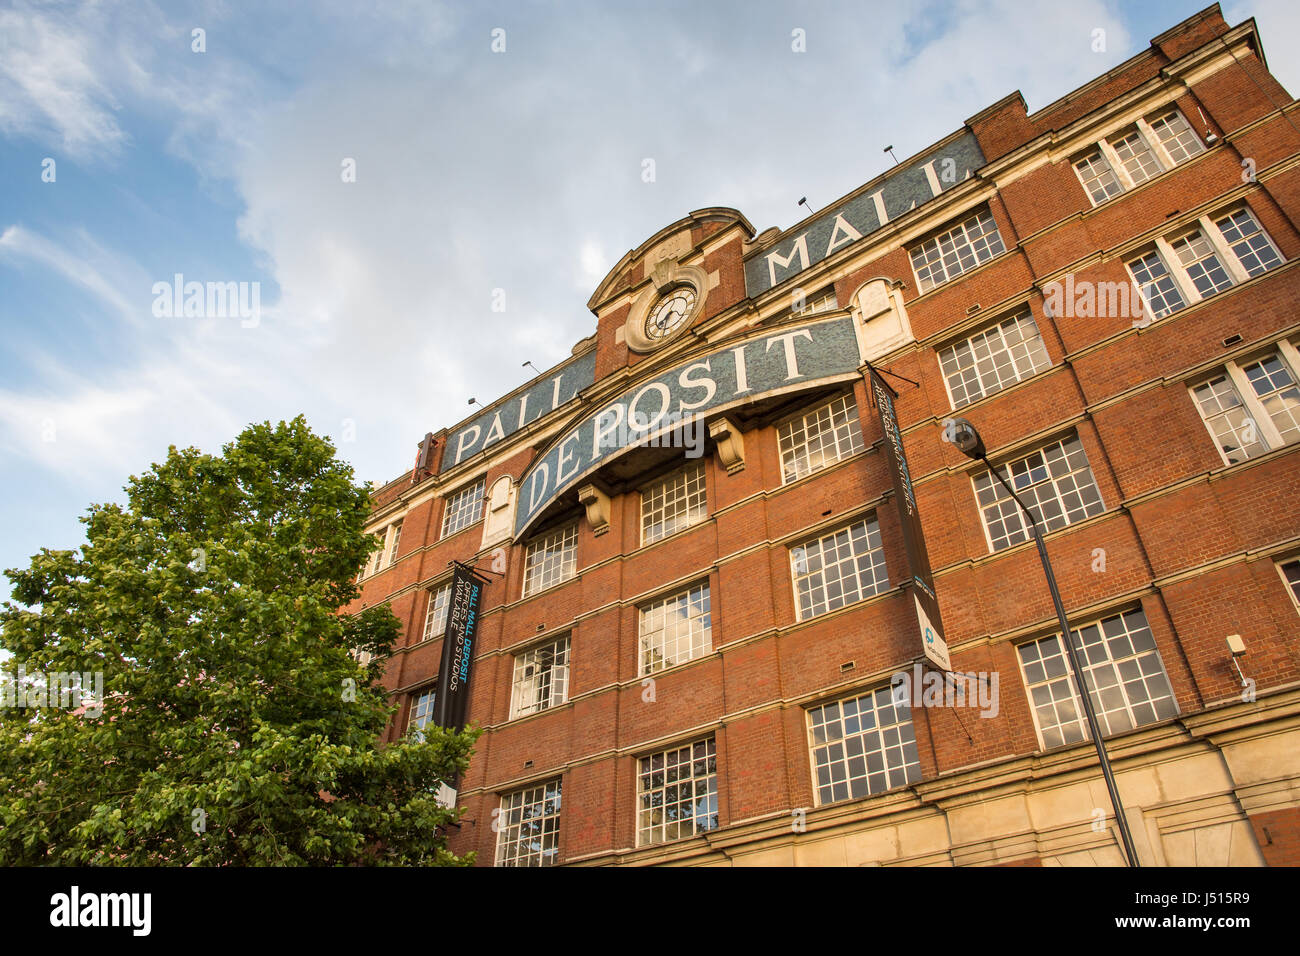 London, England - July 10, 2016: The 1901 brick facade of the Pall Mall Deposit, a safe deposit warehouse in Ladbroke Grove. Stock Photo